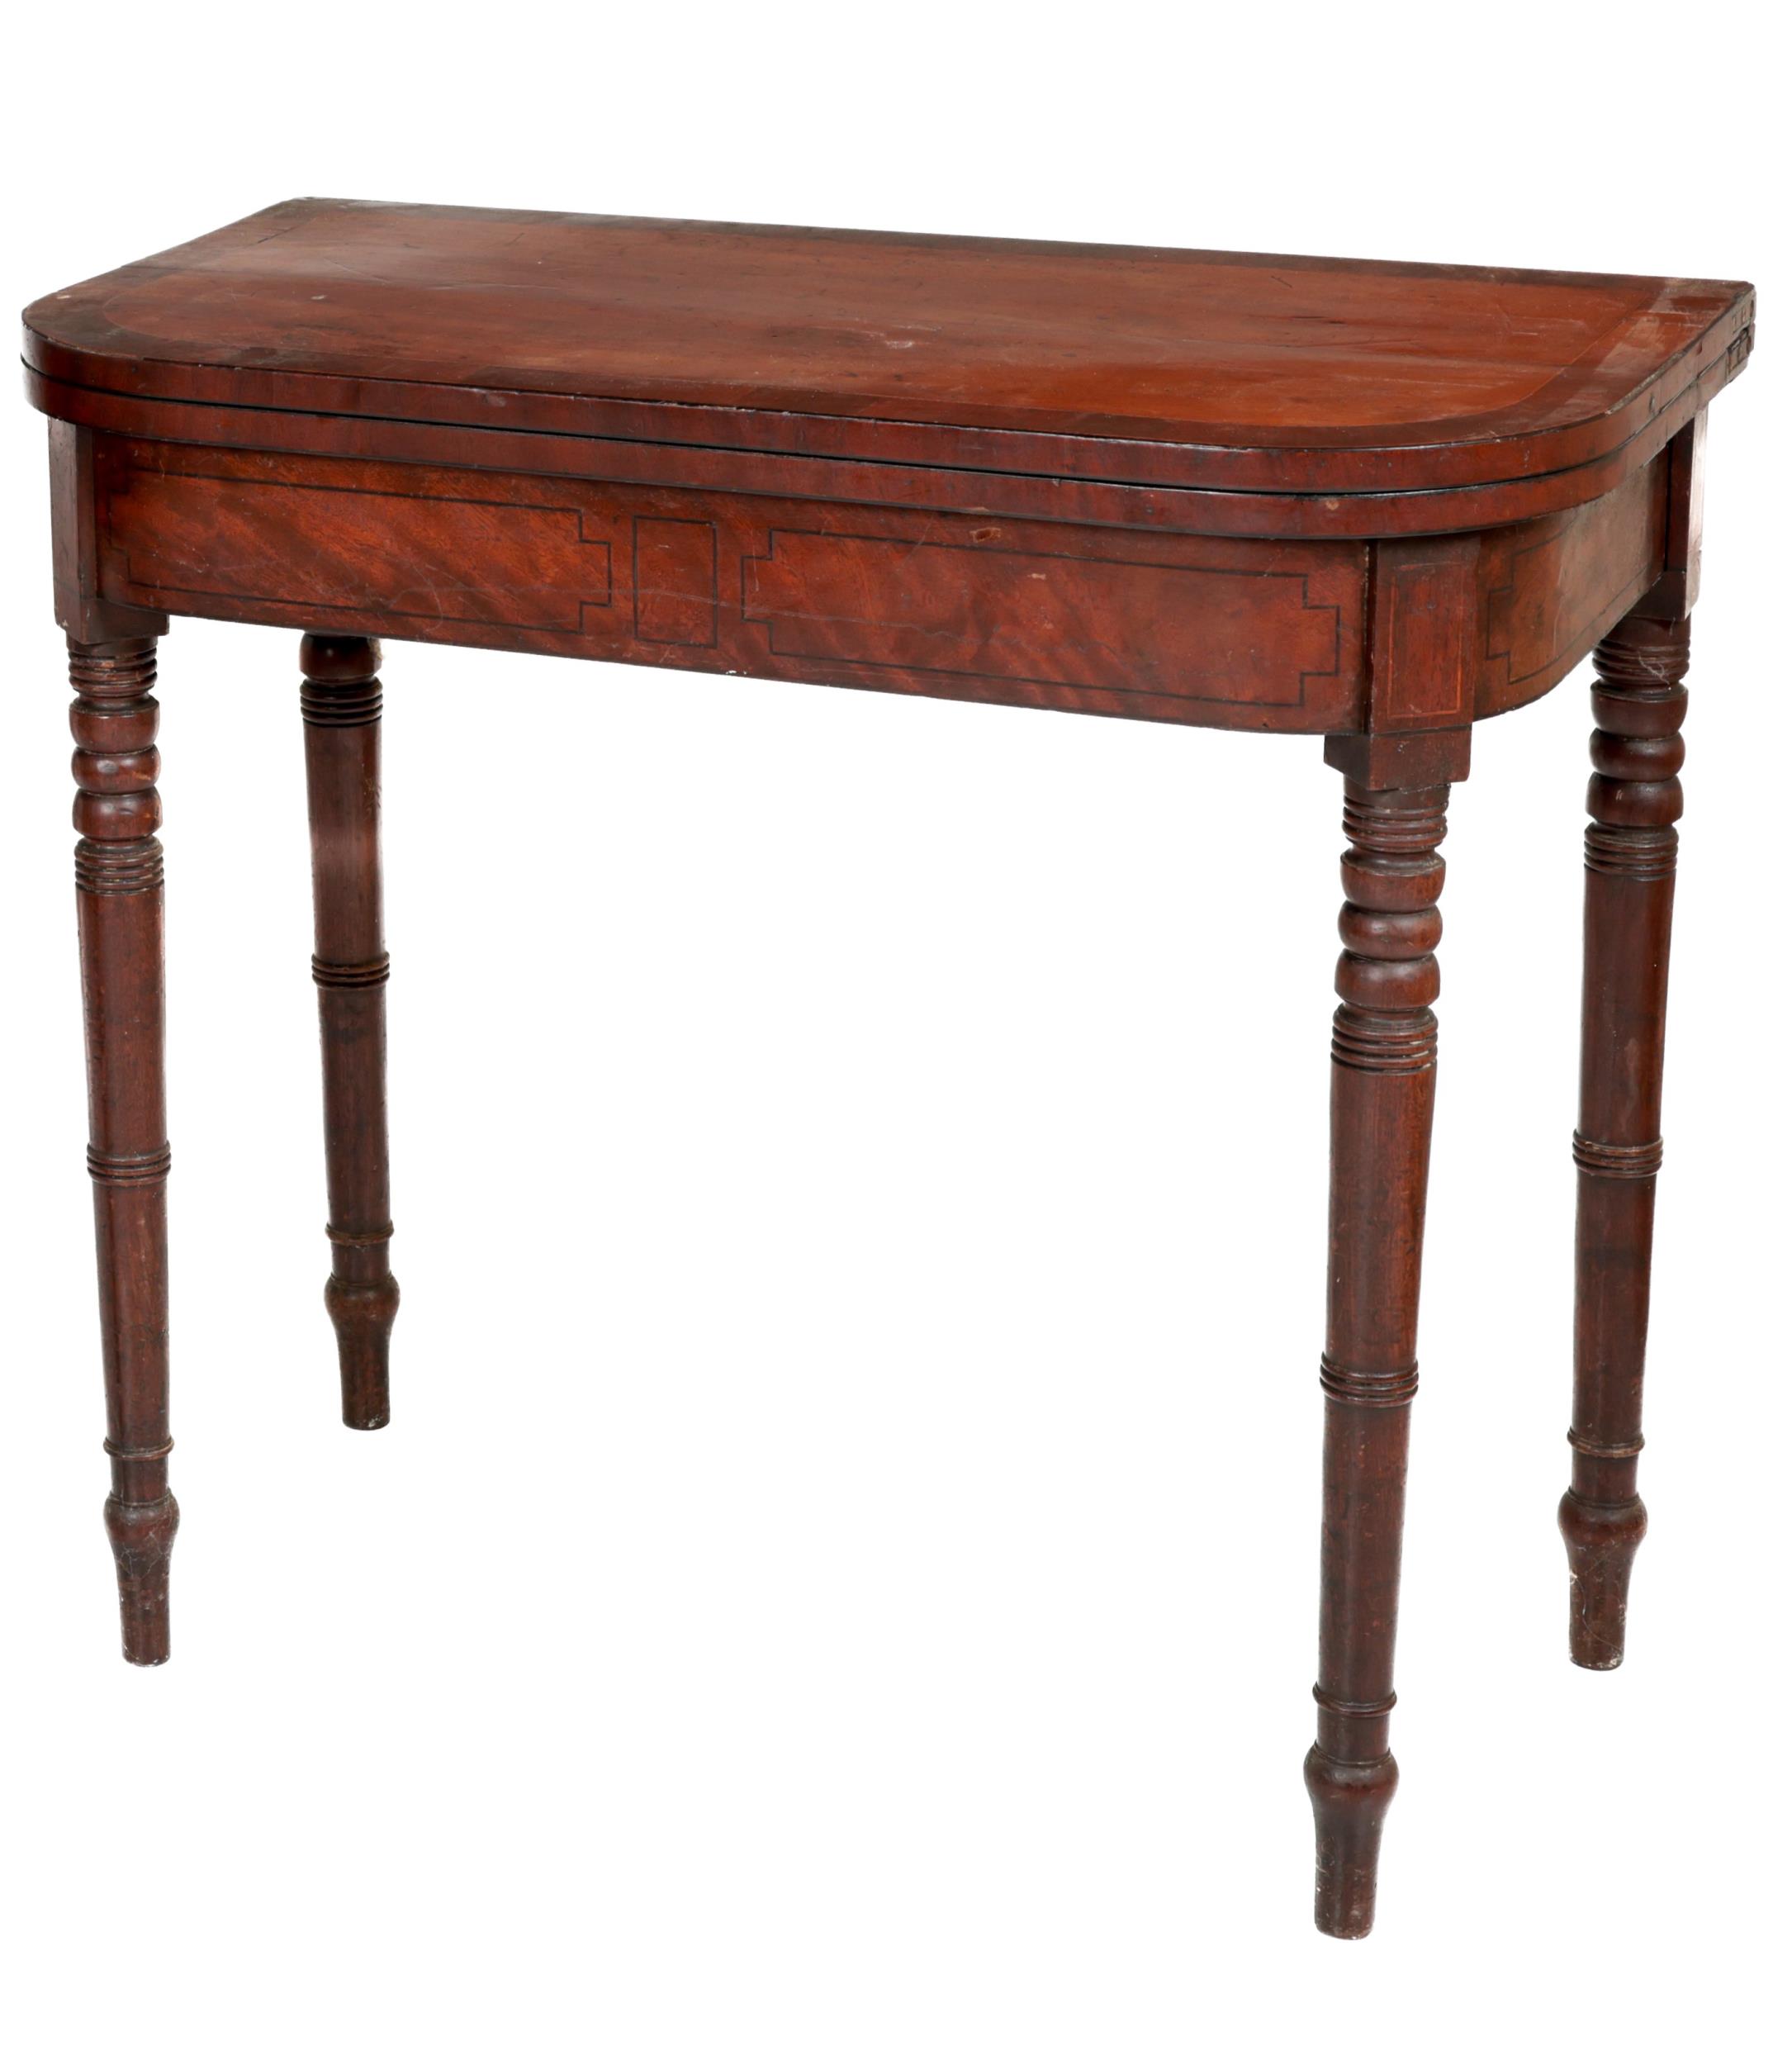 A 19th Century Irish mahogany fold-over Card Table, probably Cork, the top with rosewood